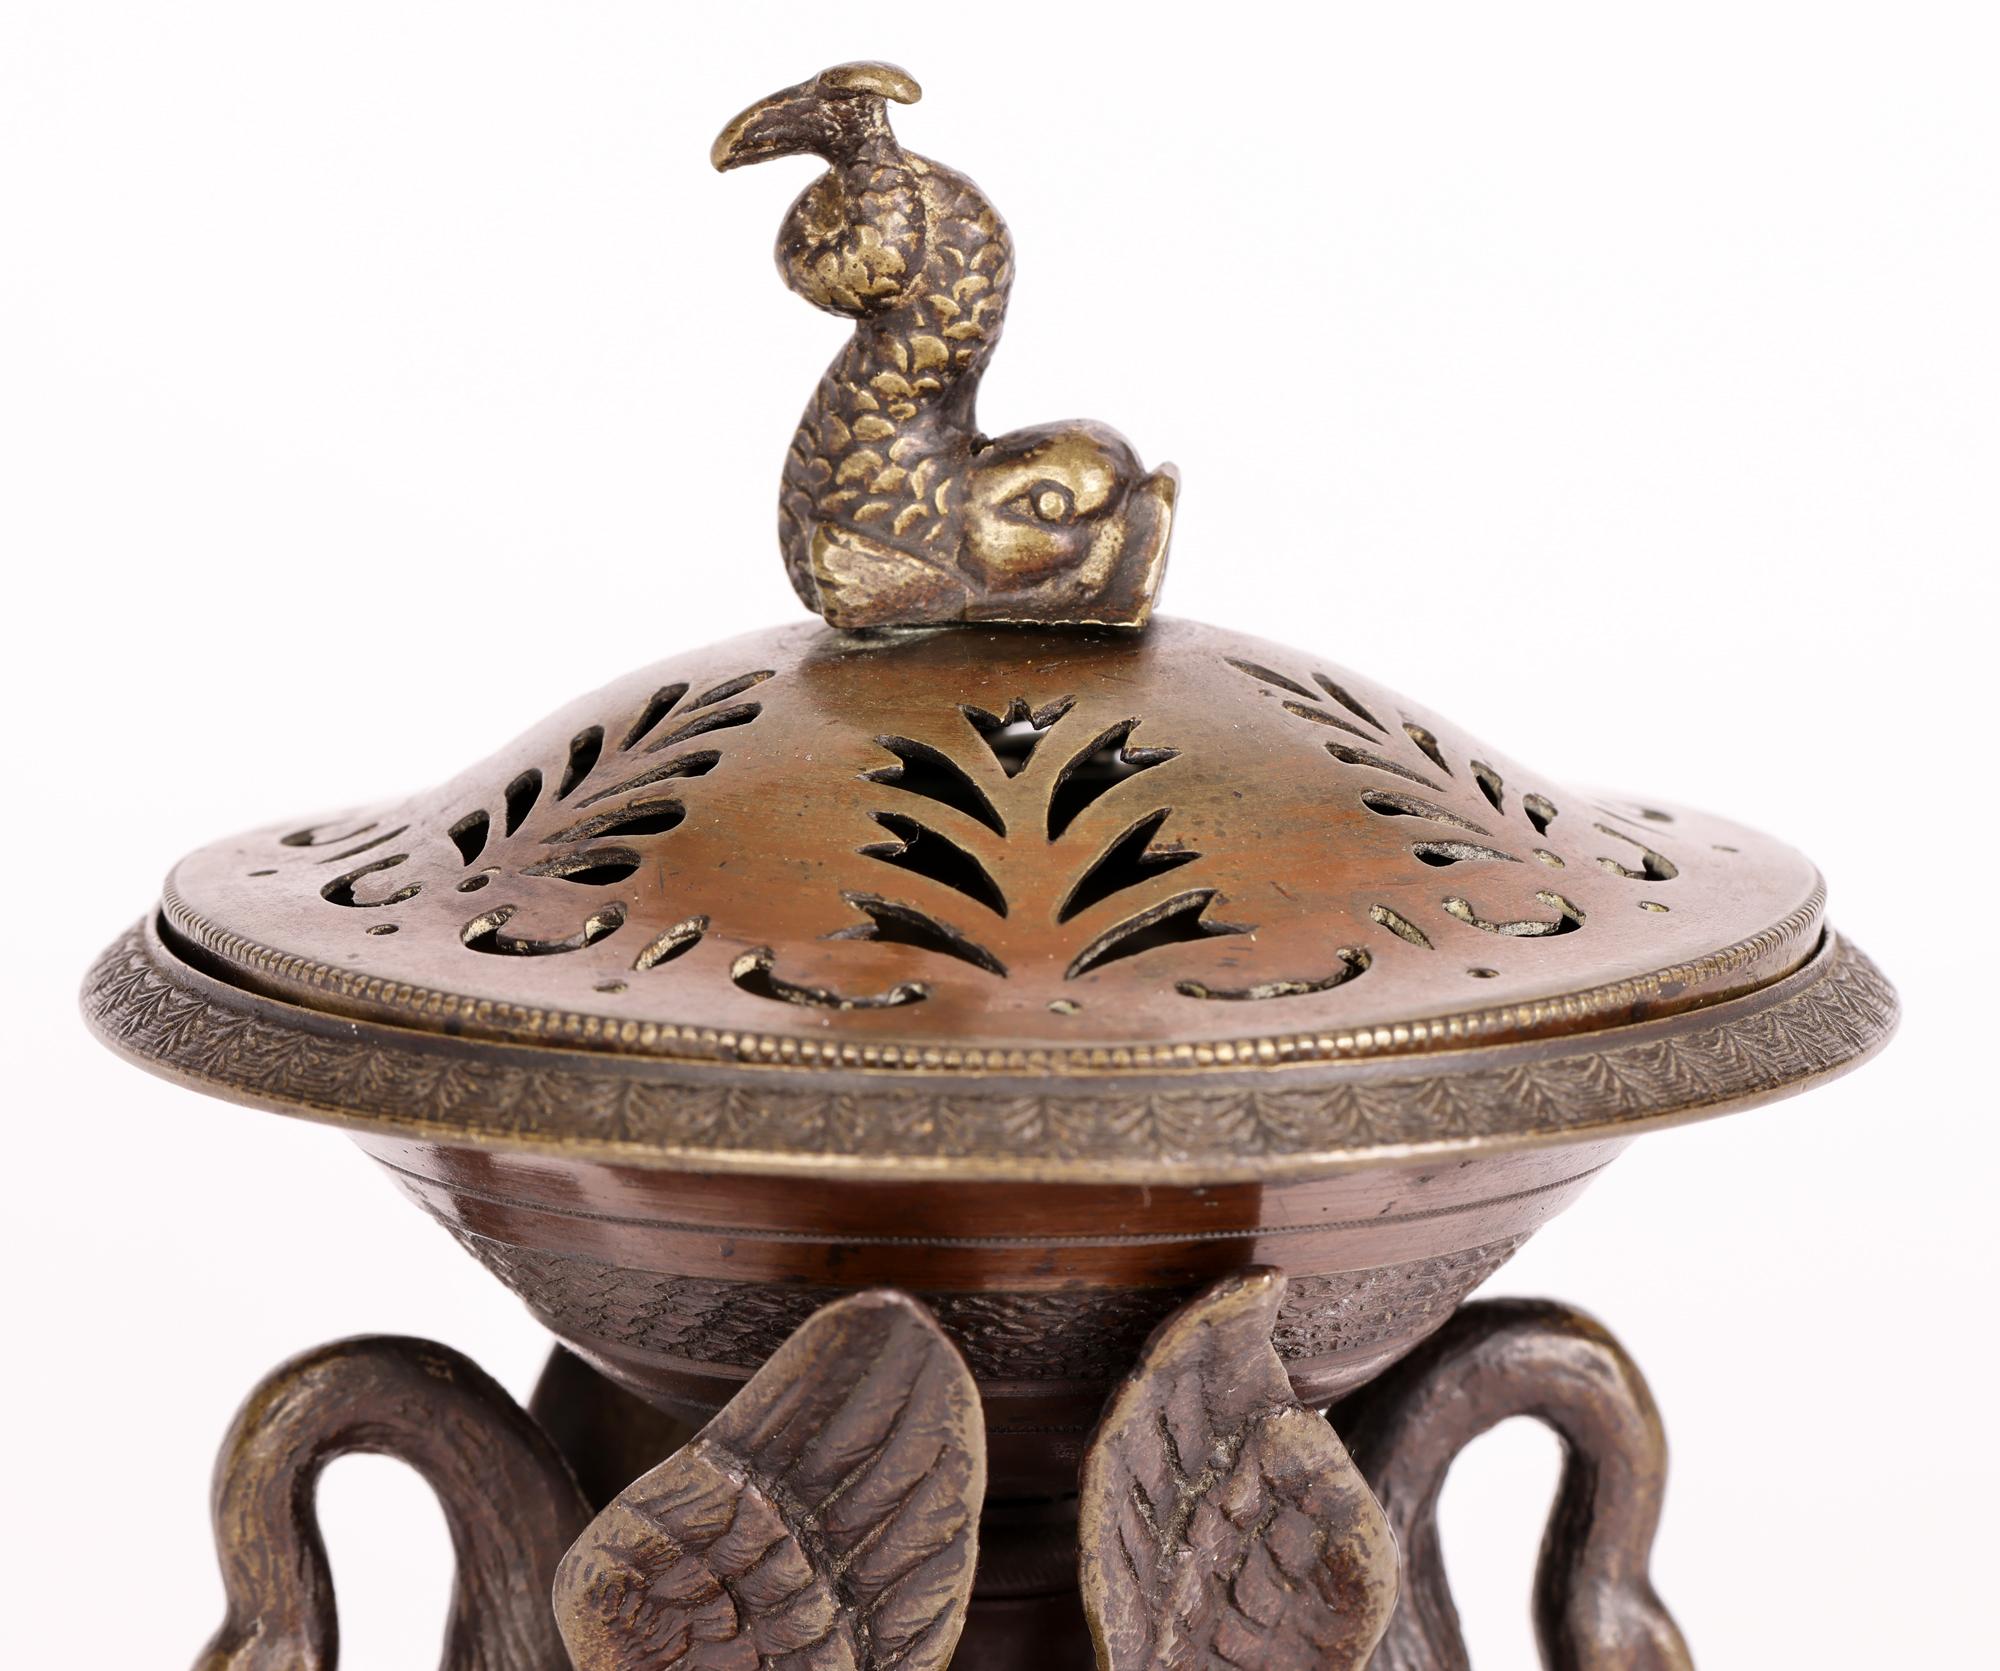 A very fine antique Italian attributed grand tour bronze lidded censer applied with birds dating from around 1860. The censer stands raised on a square base supported on four flat round corner feet. The central column support sits on a round based